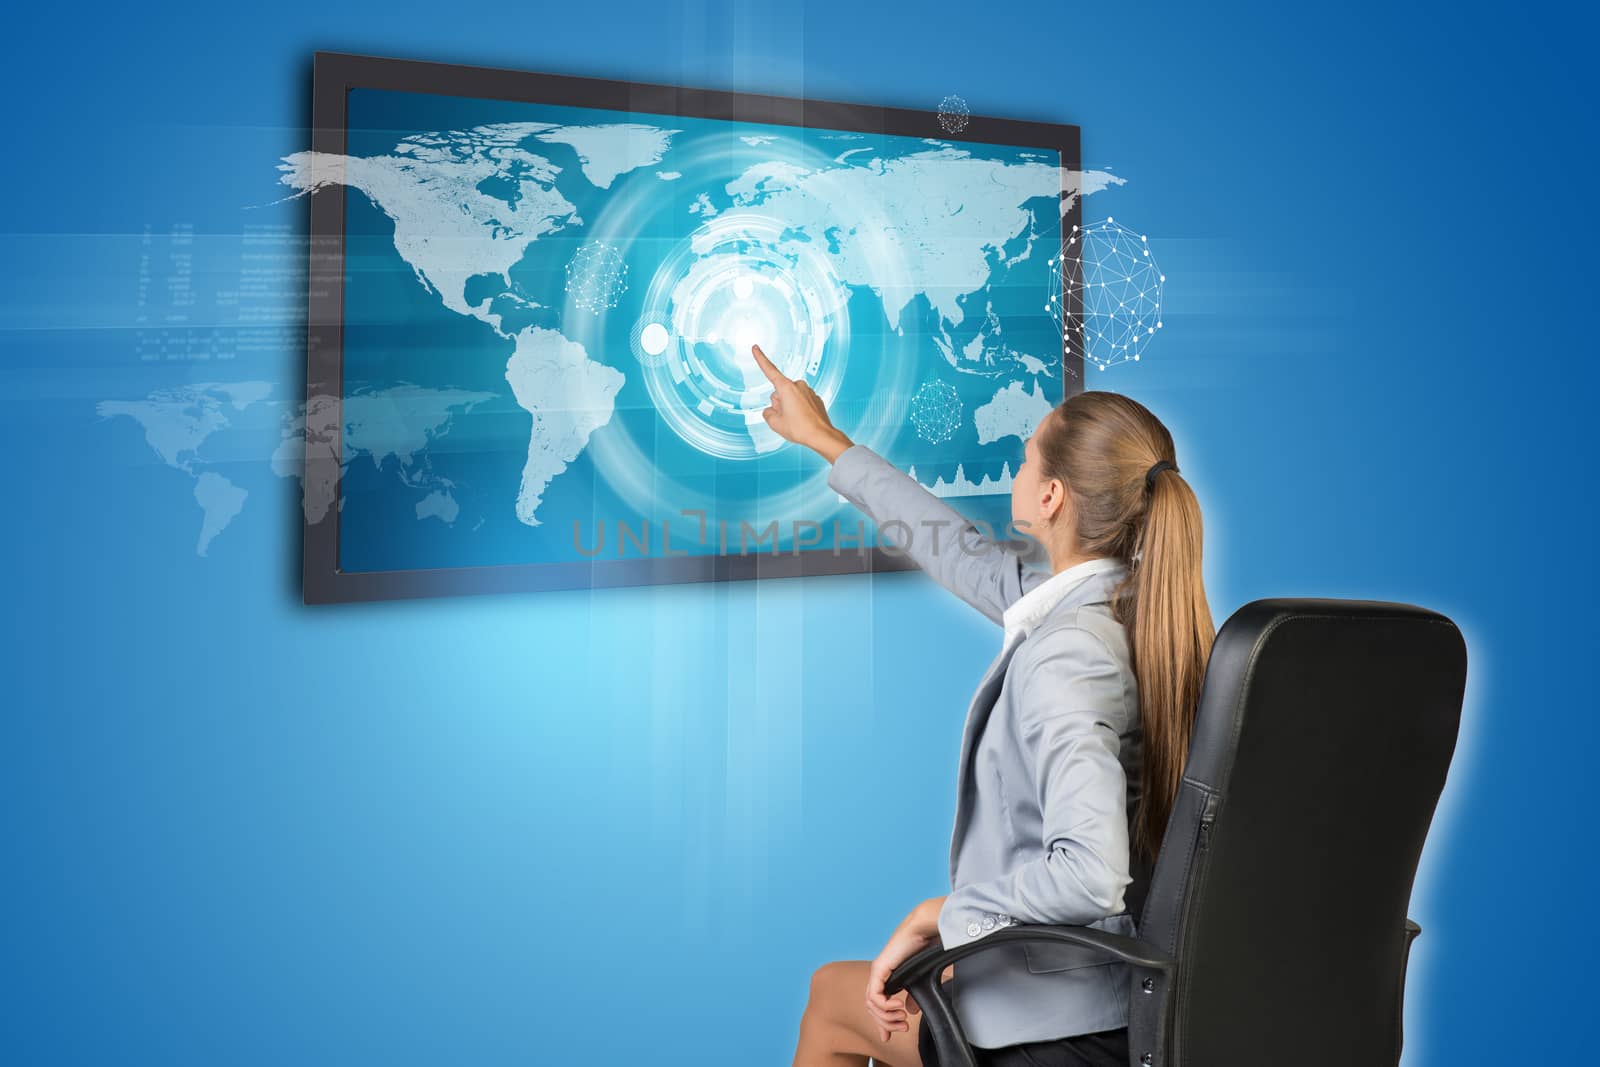 Businesswoman operating touch screen interface with world map, on blue background